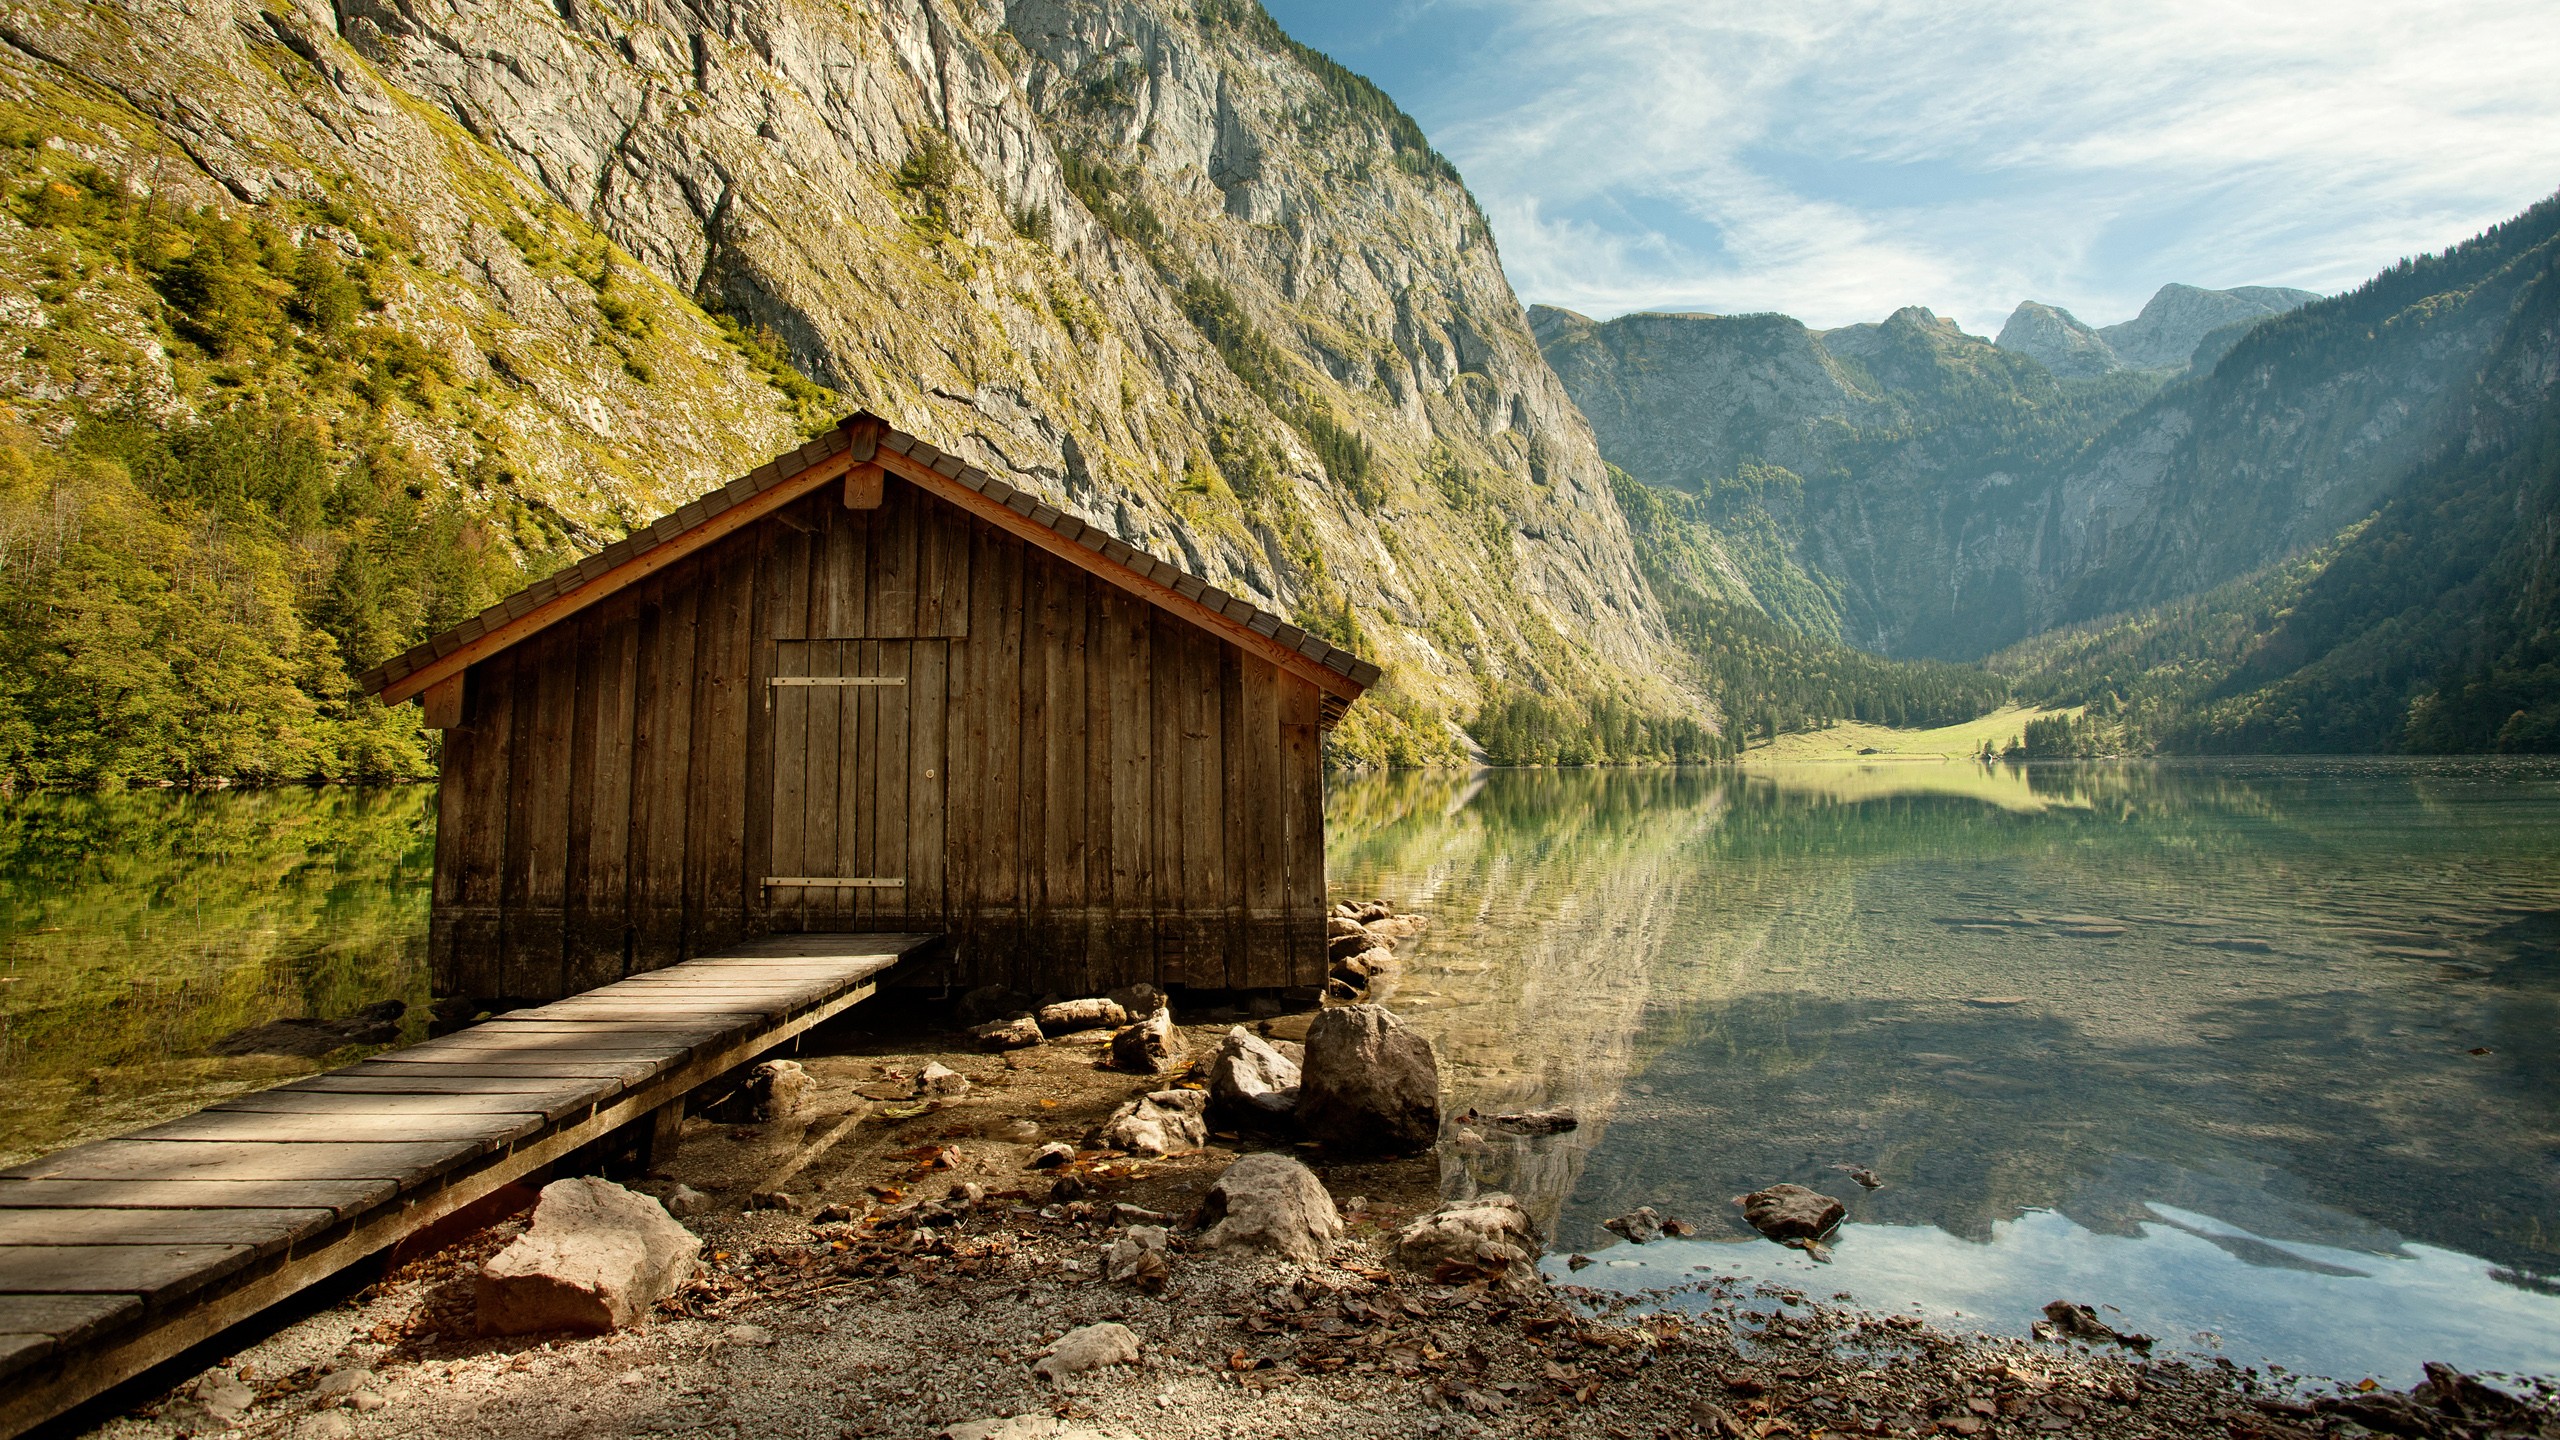 General 2560x1440 lake Obersee Bavaria nature outdoors mountains Germany cabin